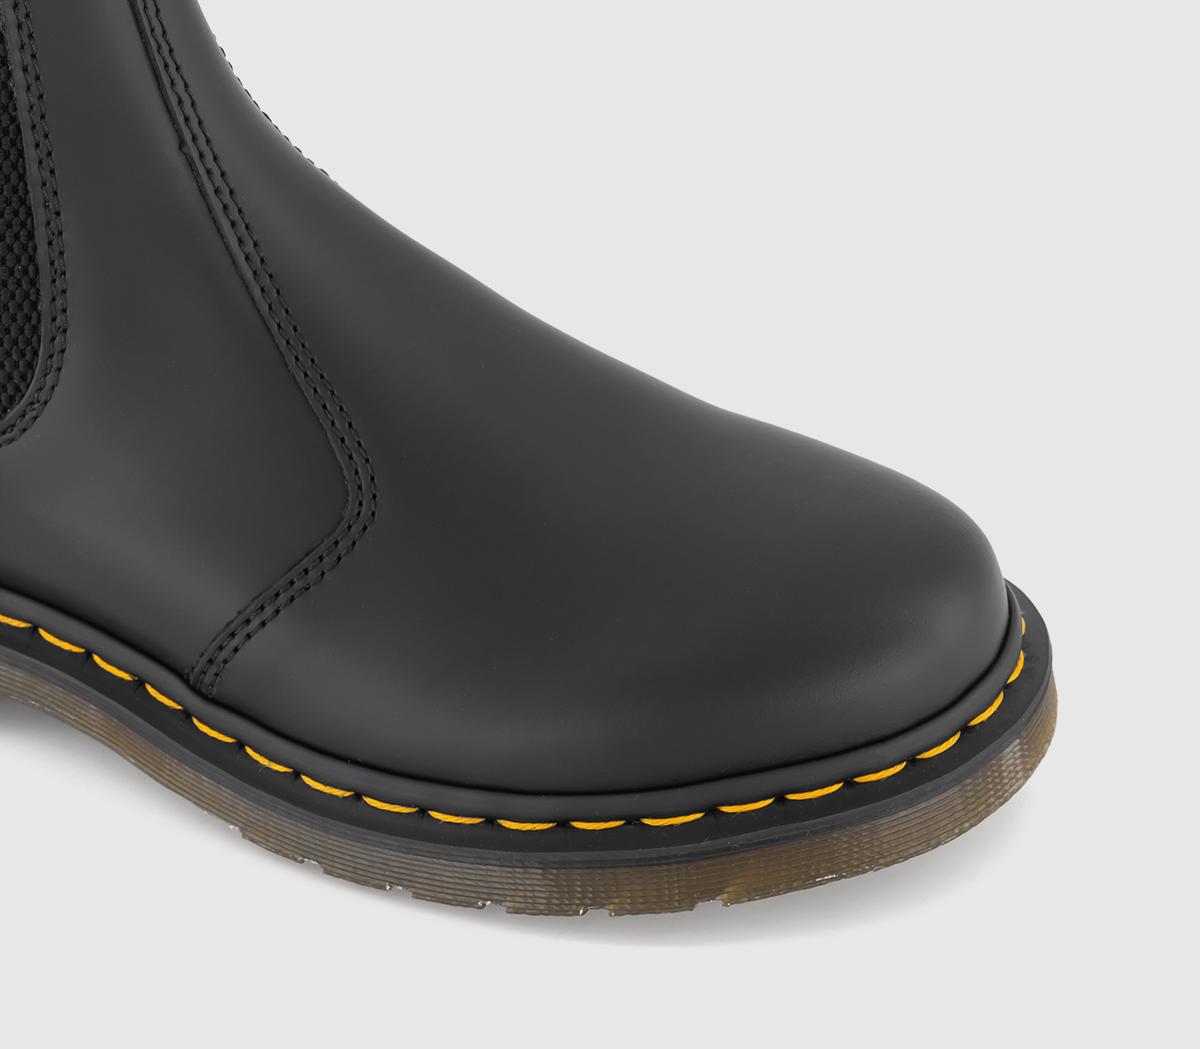 Dr. Martens 2976 Chelsea Boots Black Leather - Women's Ankle Boots